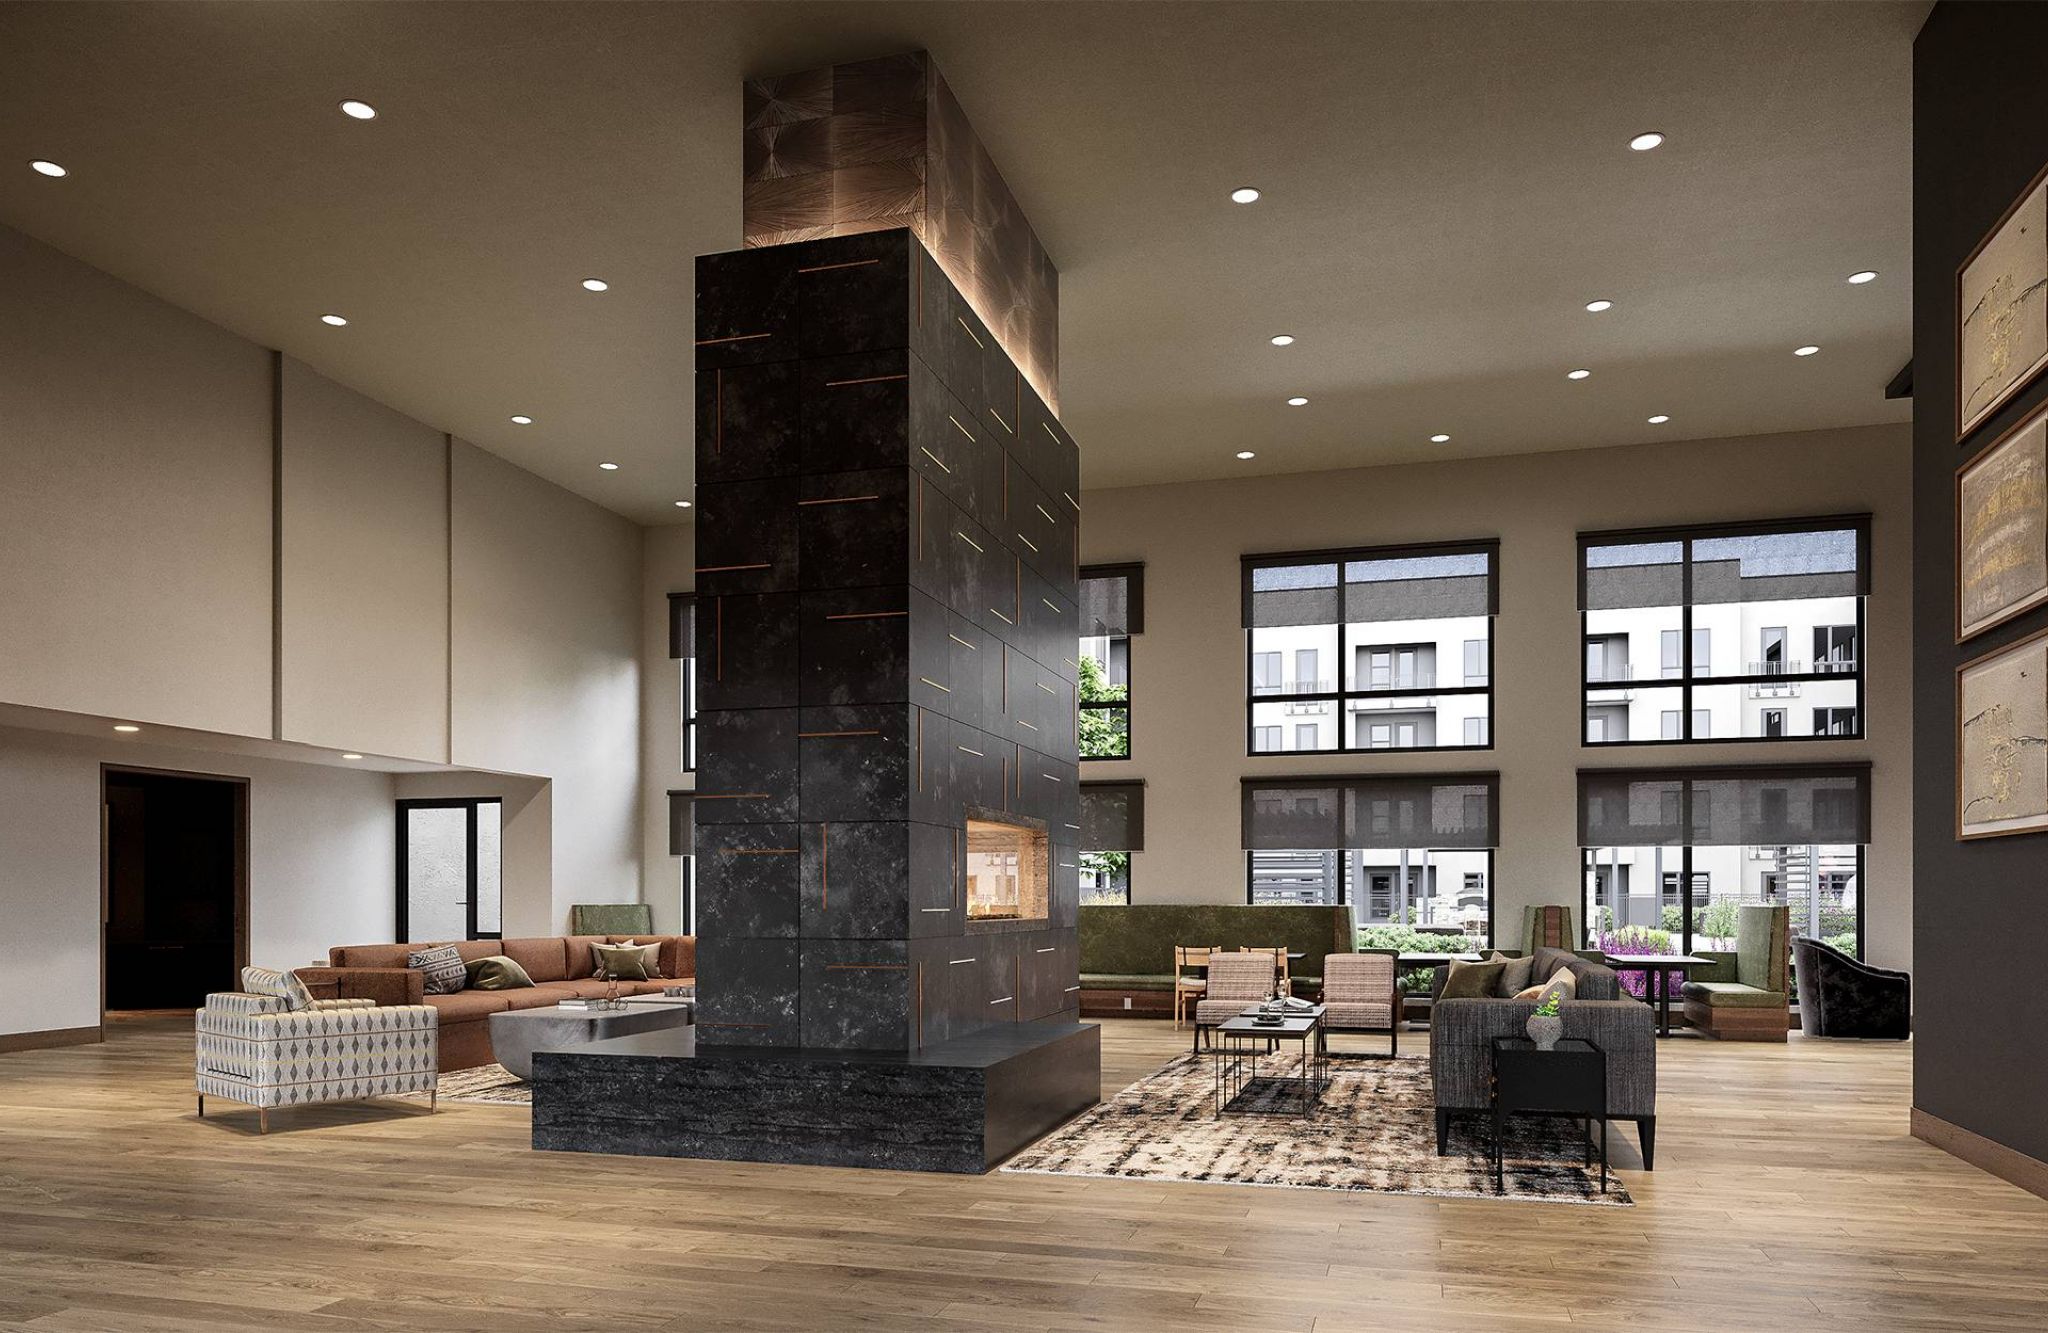 Solana Central Park apartments community clubhouse lounge area with high ceilings, fireplace, and modern furnishings